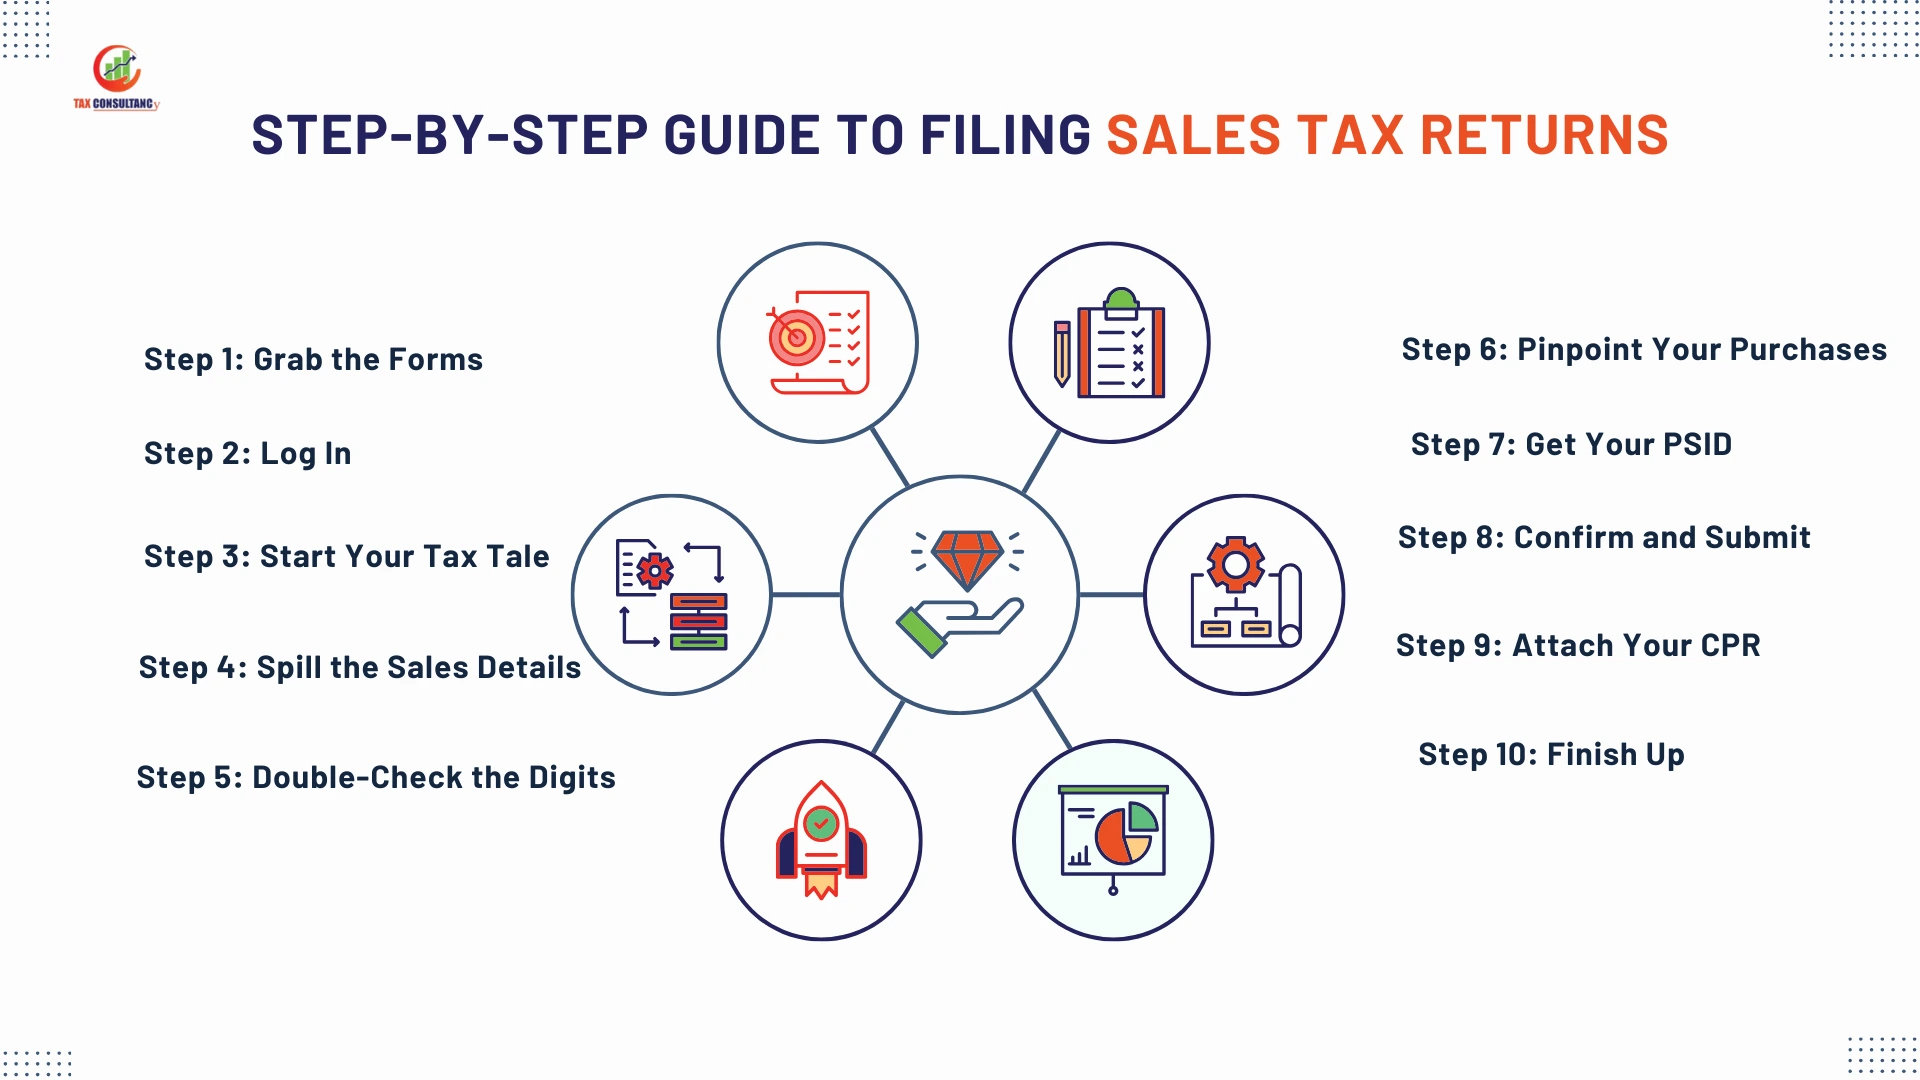 Image About Step-by-Step Guide To Filing Sales Tax Returns